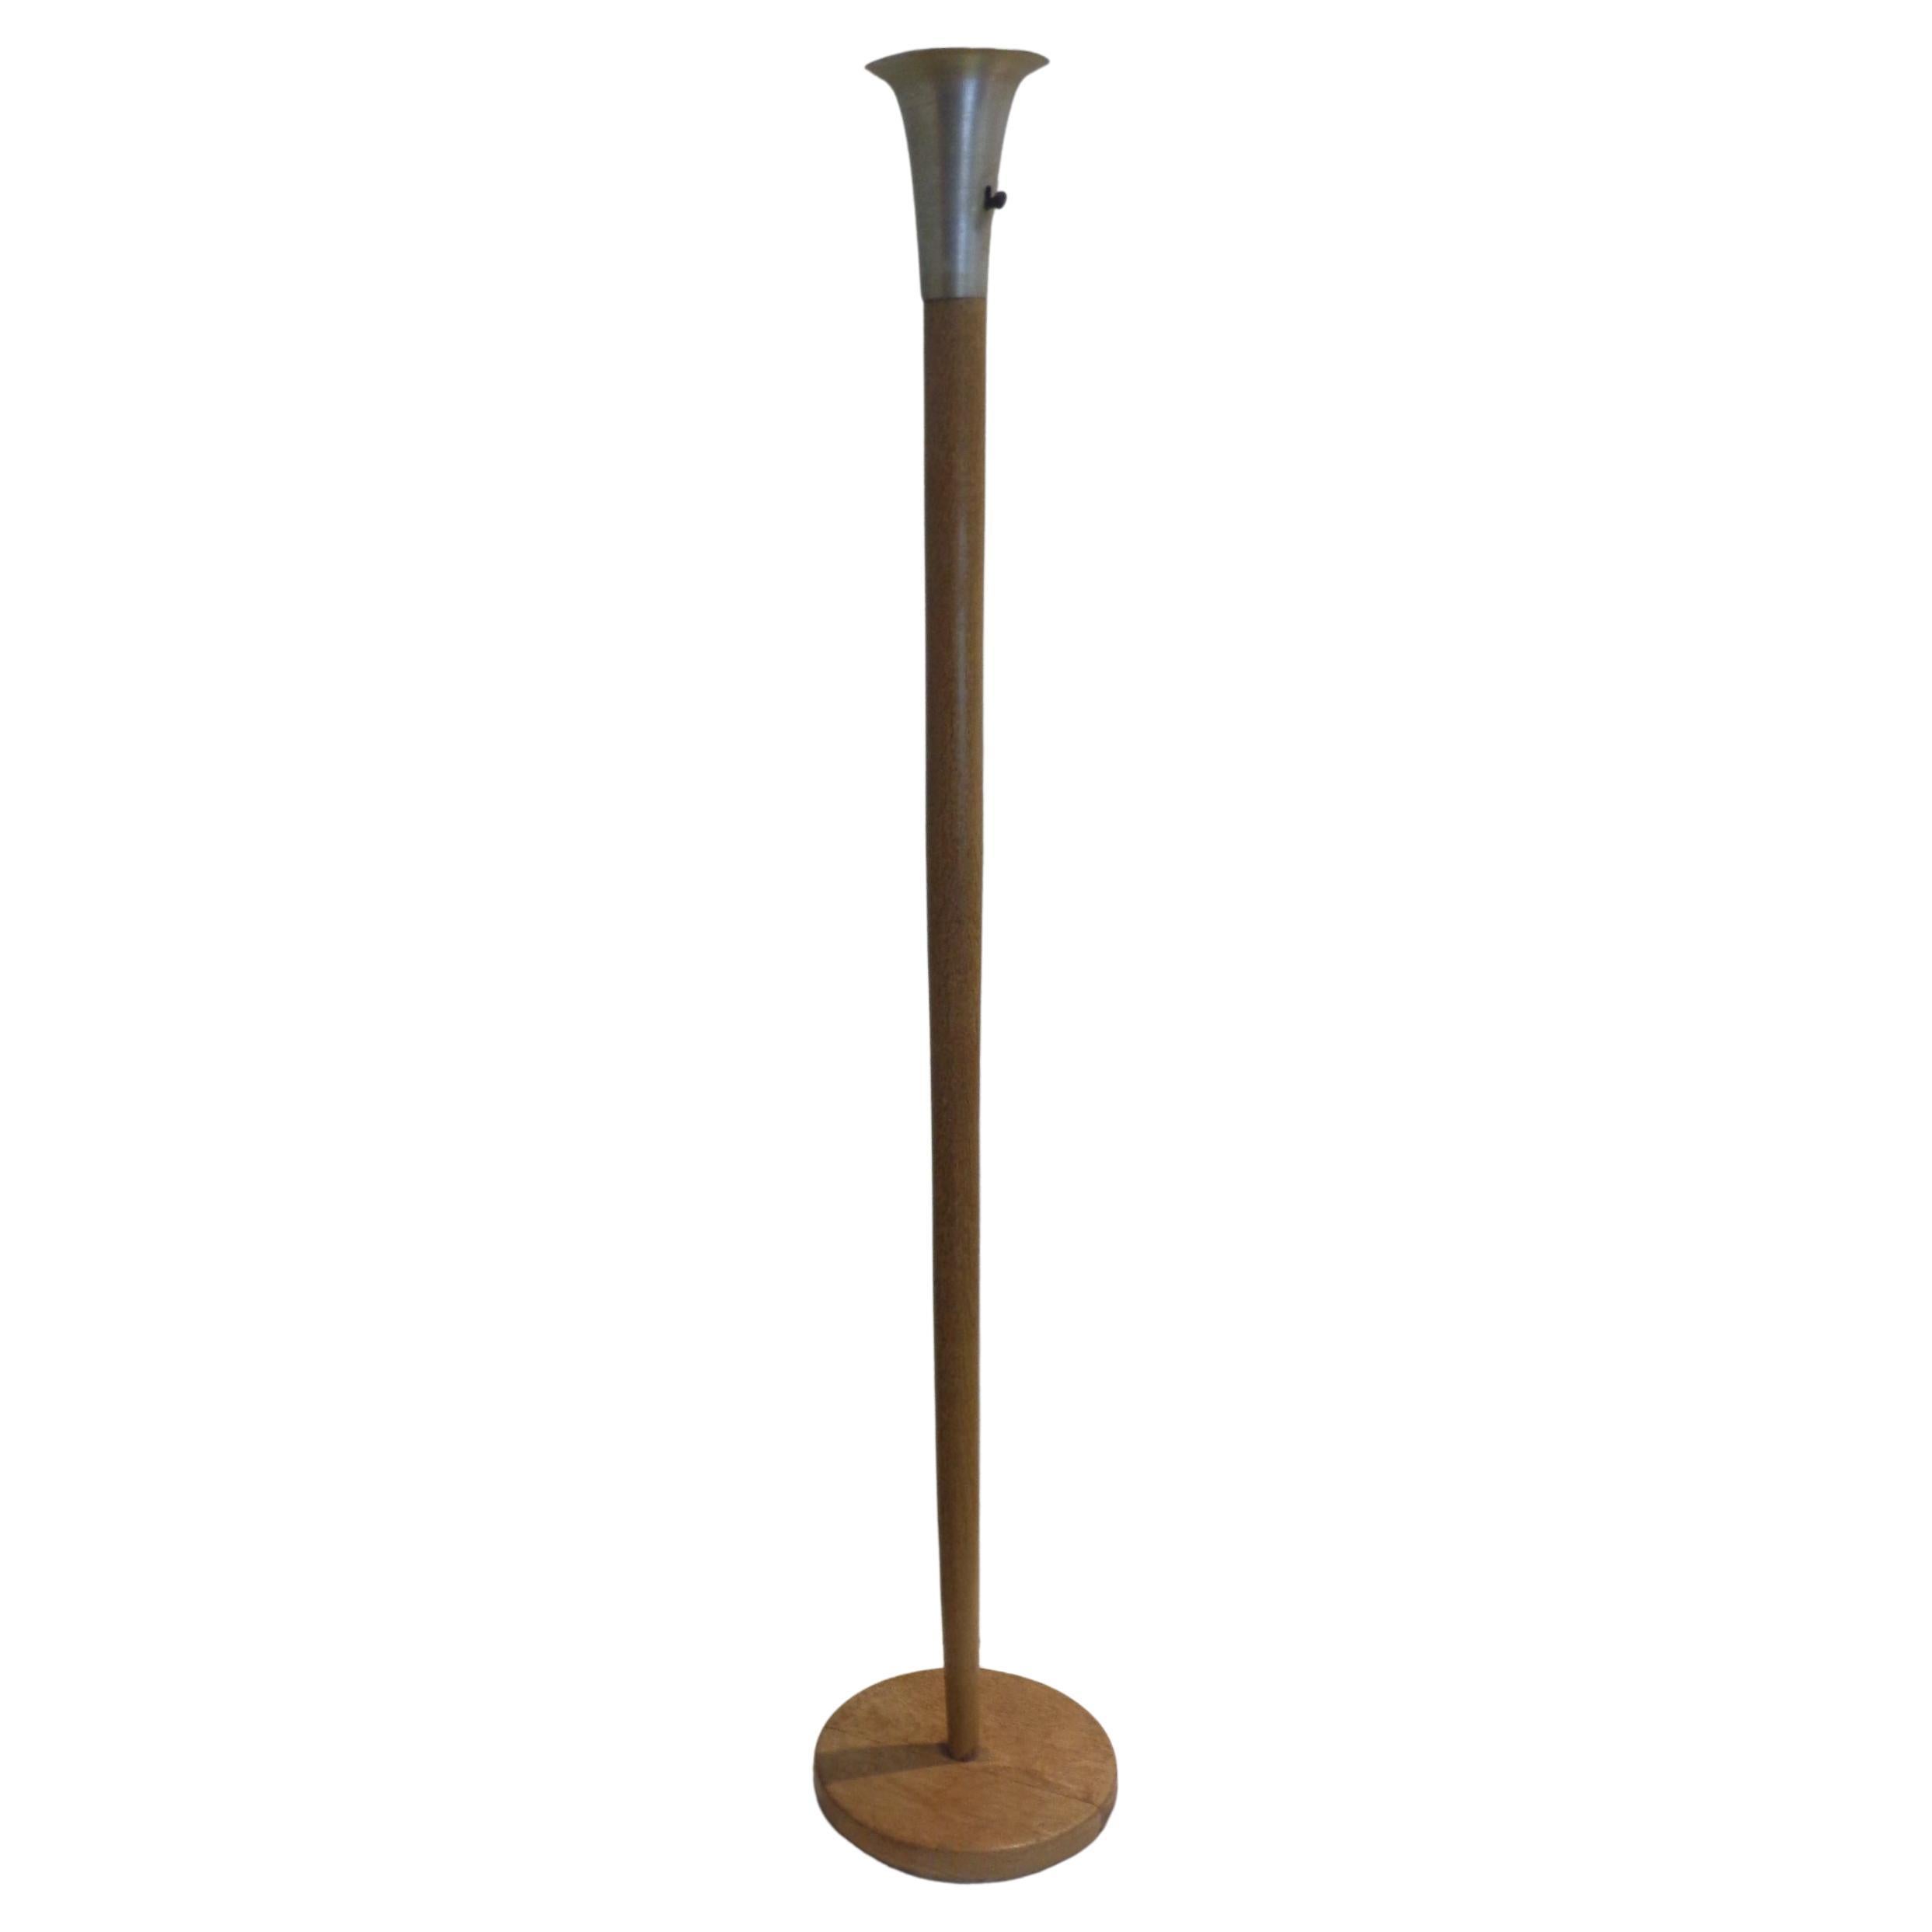  1940's Cerused Oak and Aluminum Torchiere Floor Lamp Style of Russel Wright For Sale